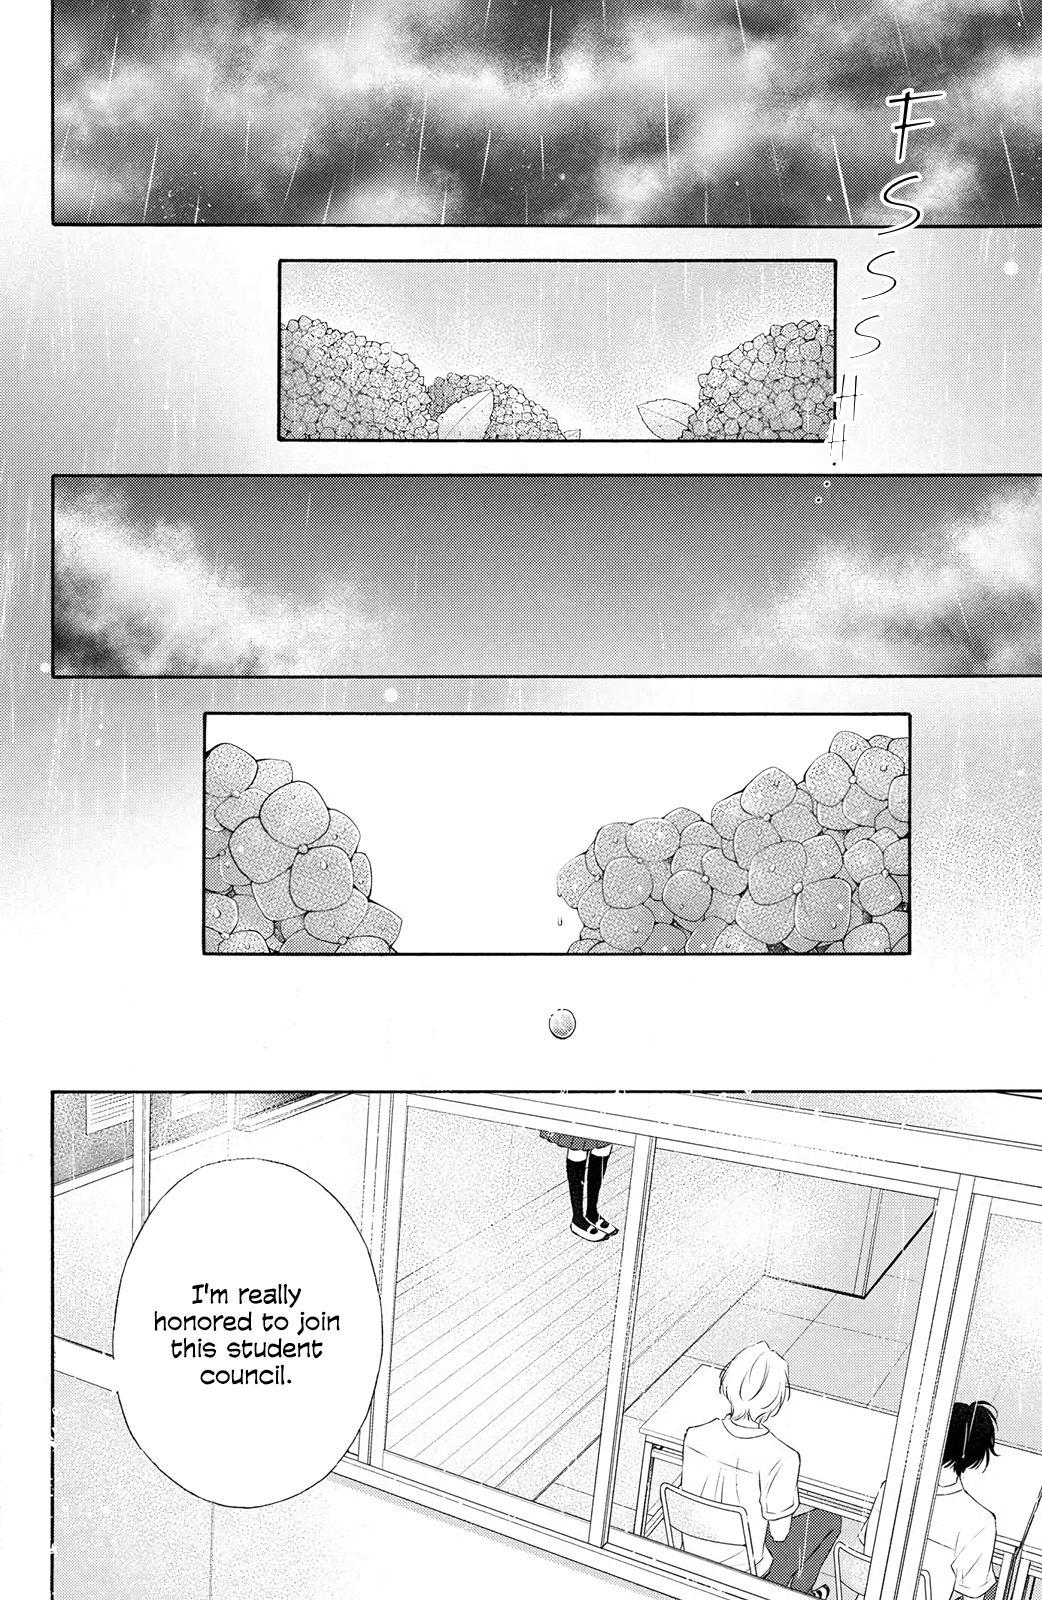 I Wish Her Love Could Come True - Page 2